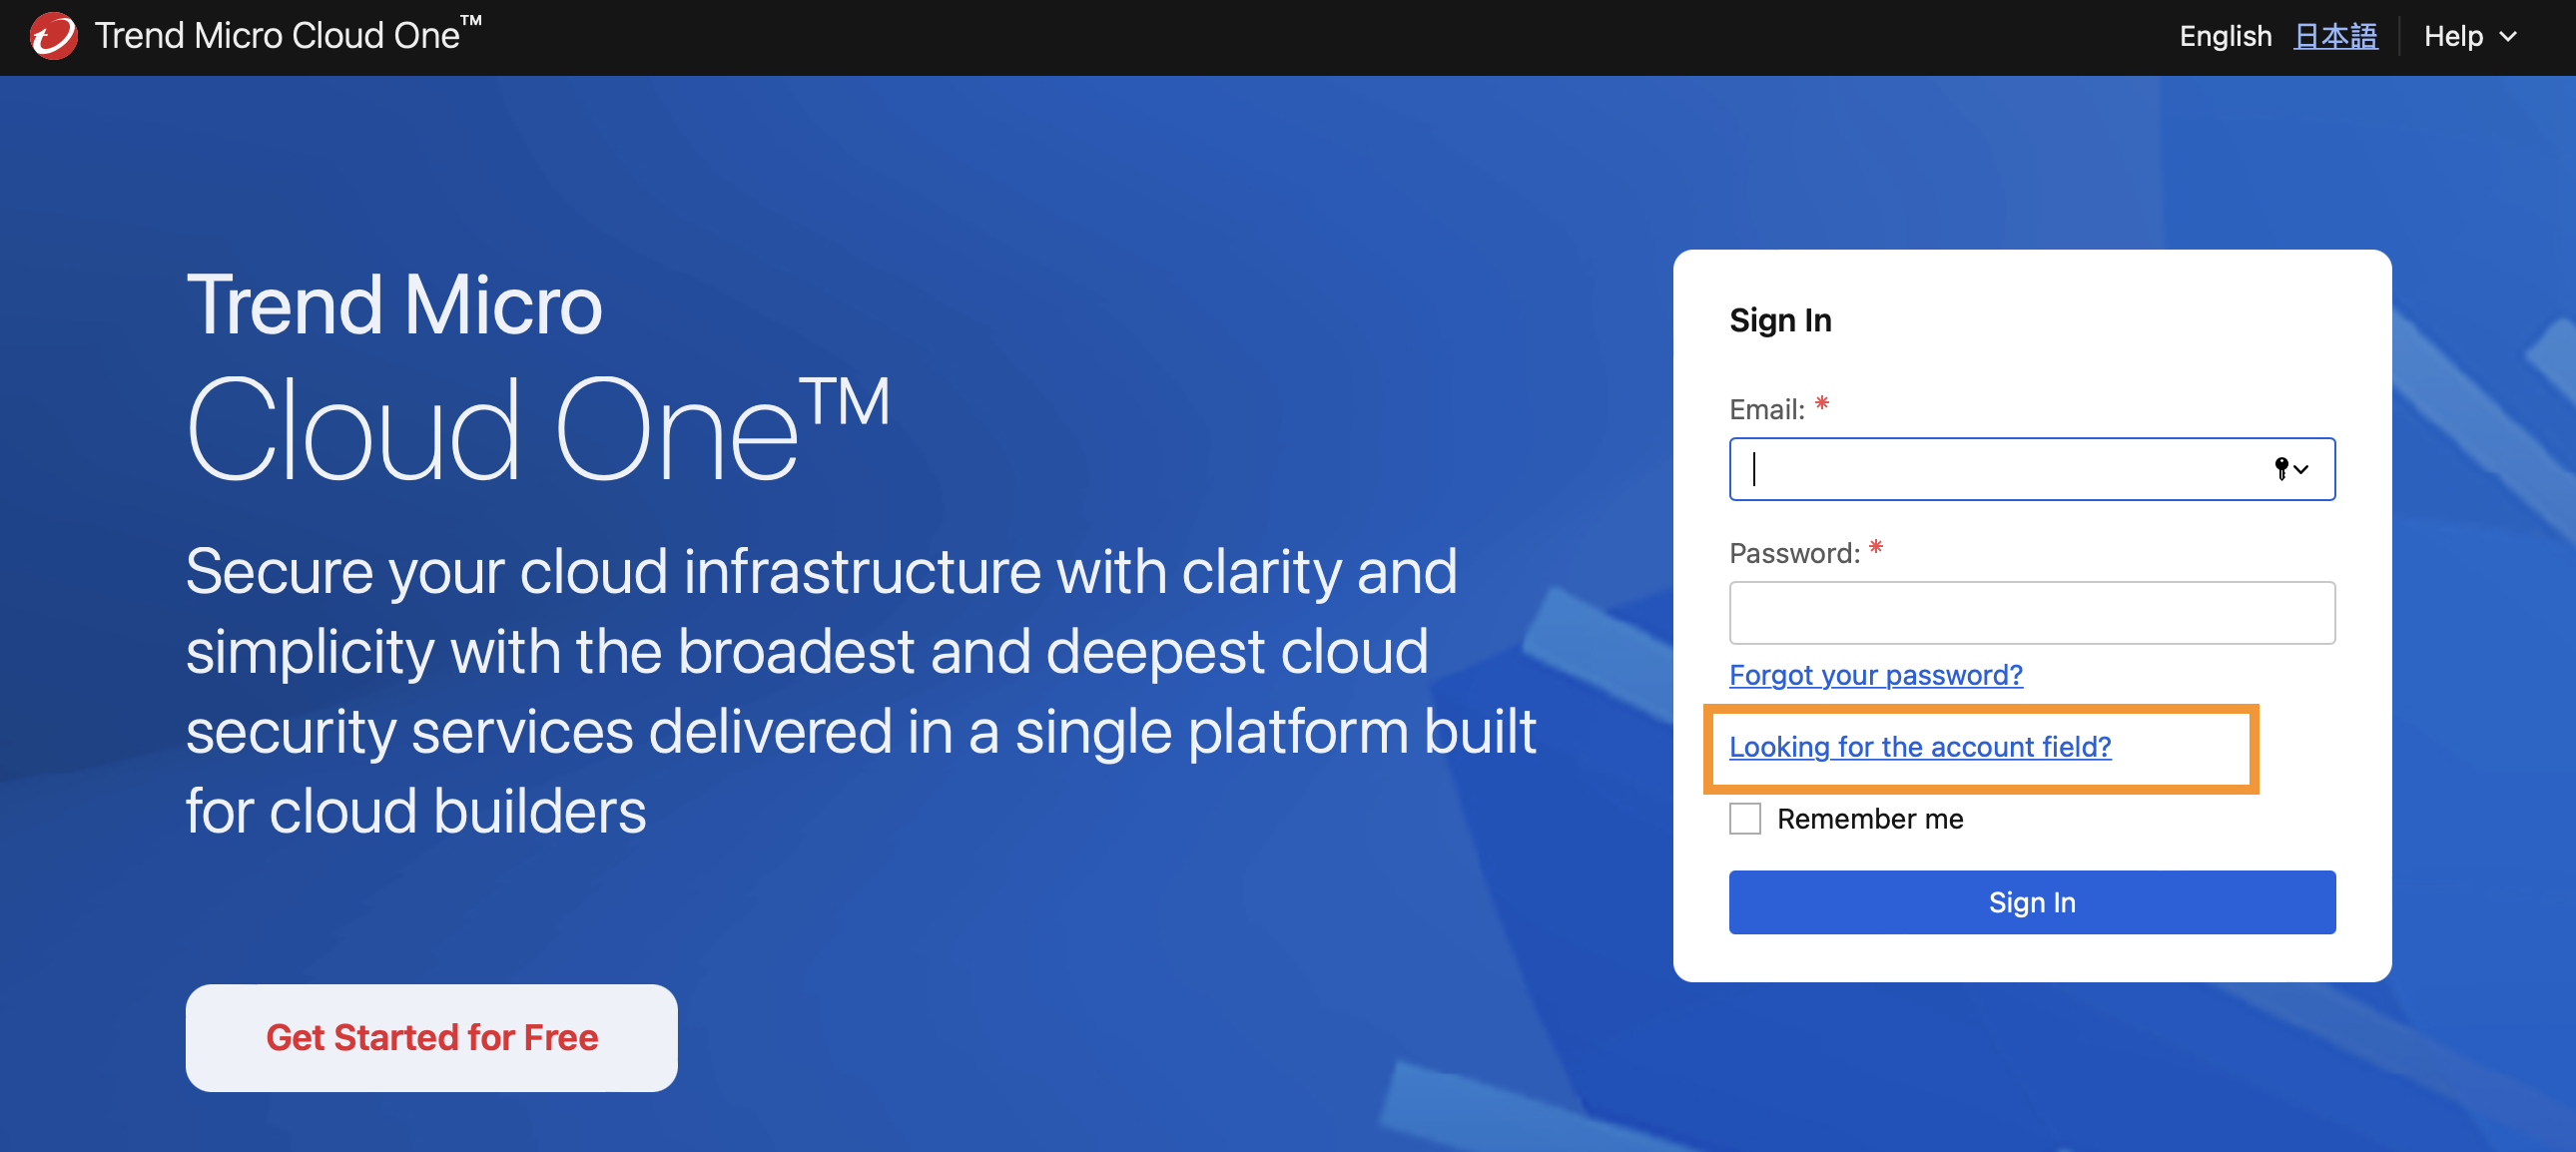 Cloud One sign-in page